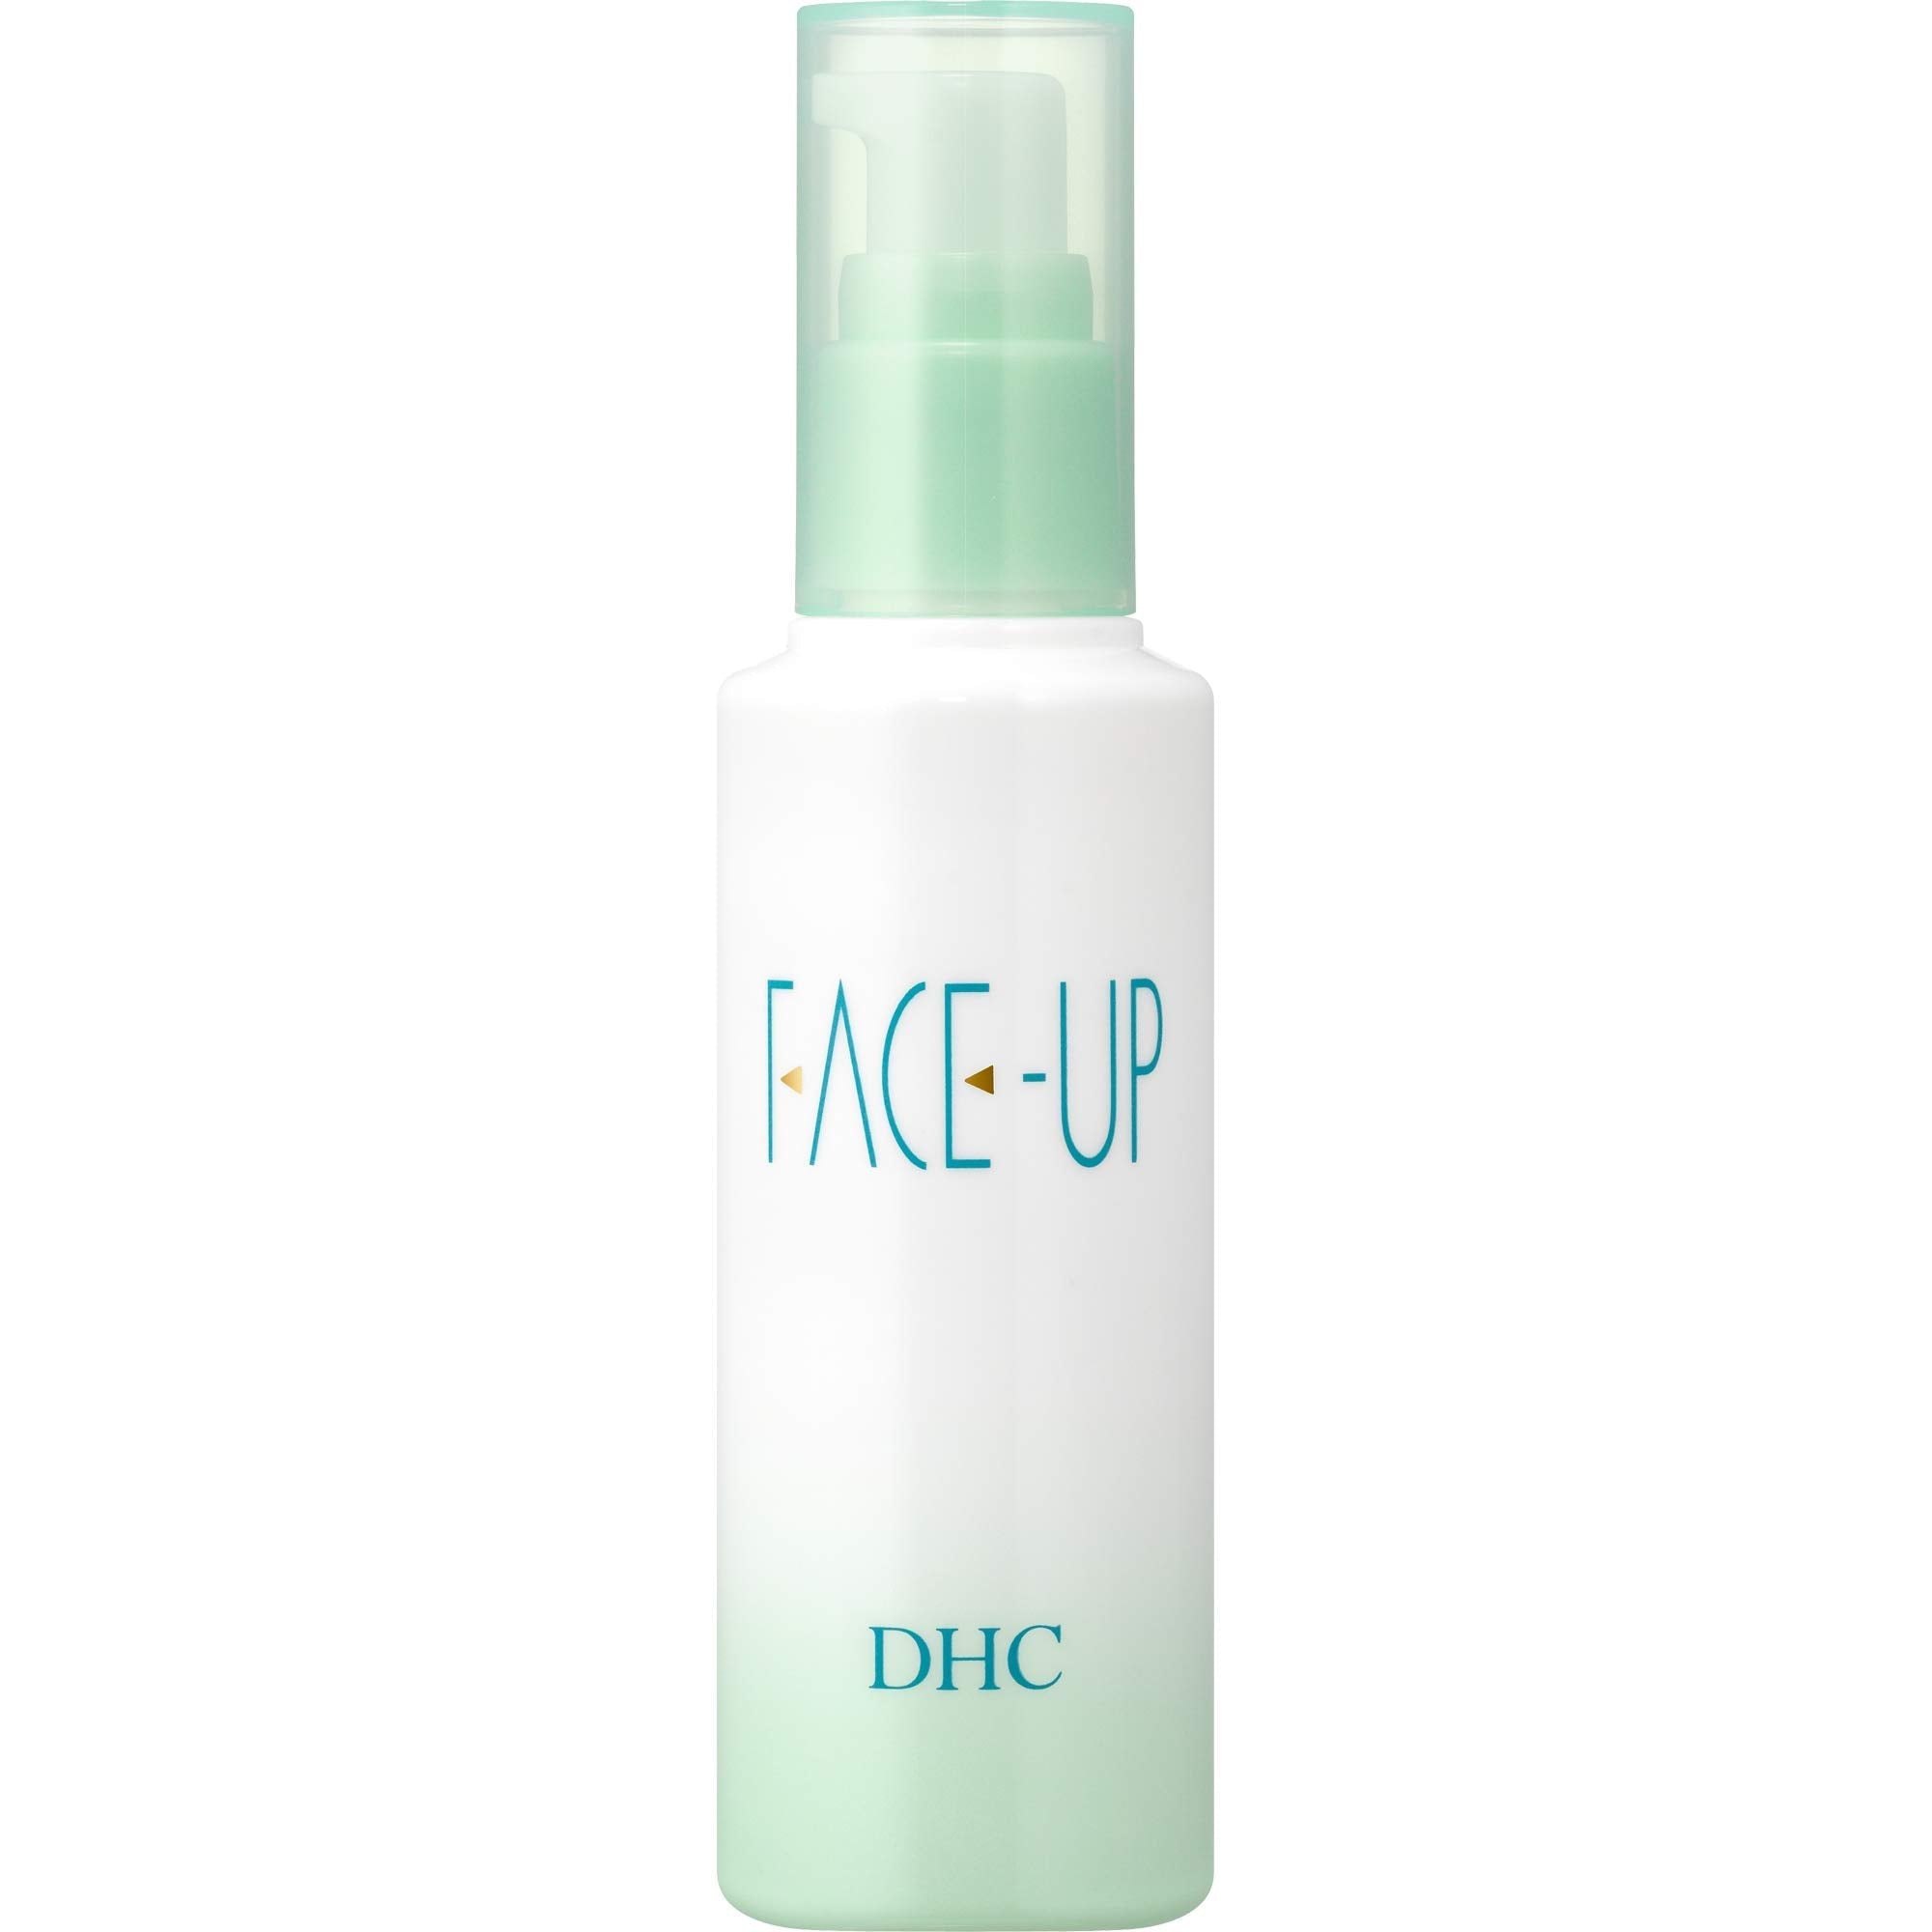 Dhc Face - Up 100ml - Japanese Brightening And Moisturizing Lotion - Facial Skincare Product